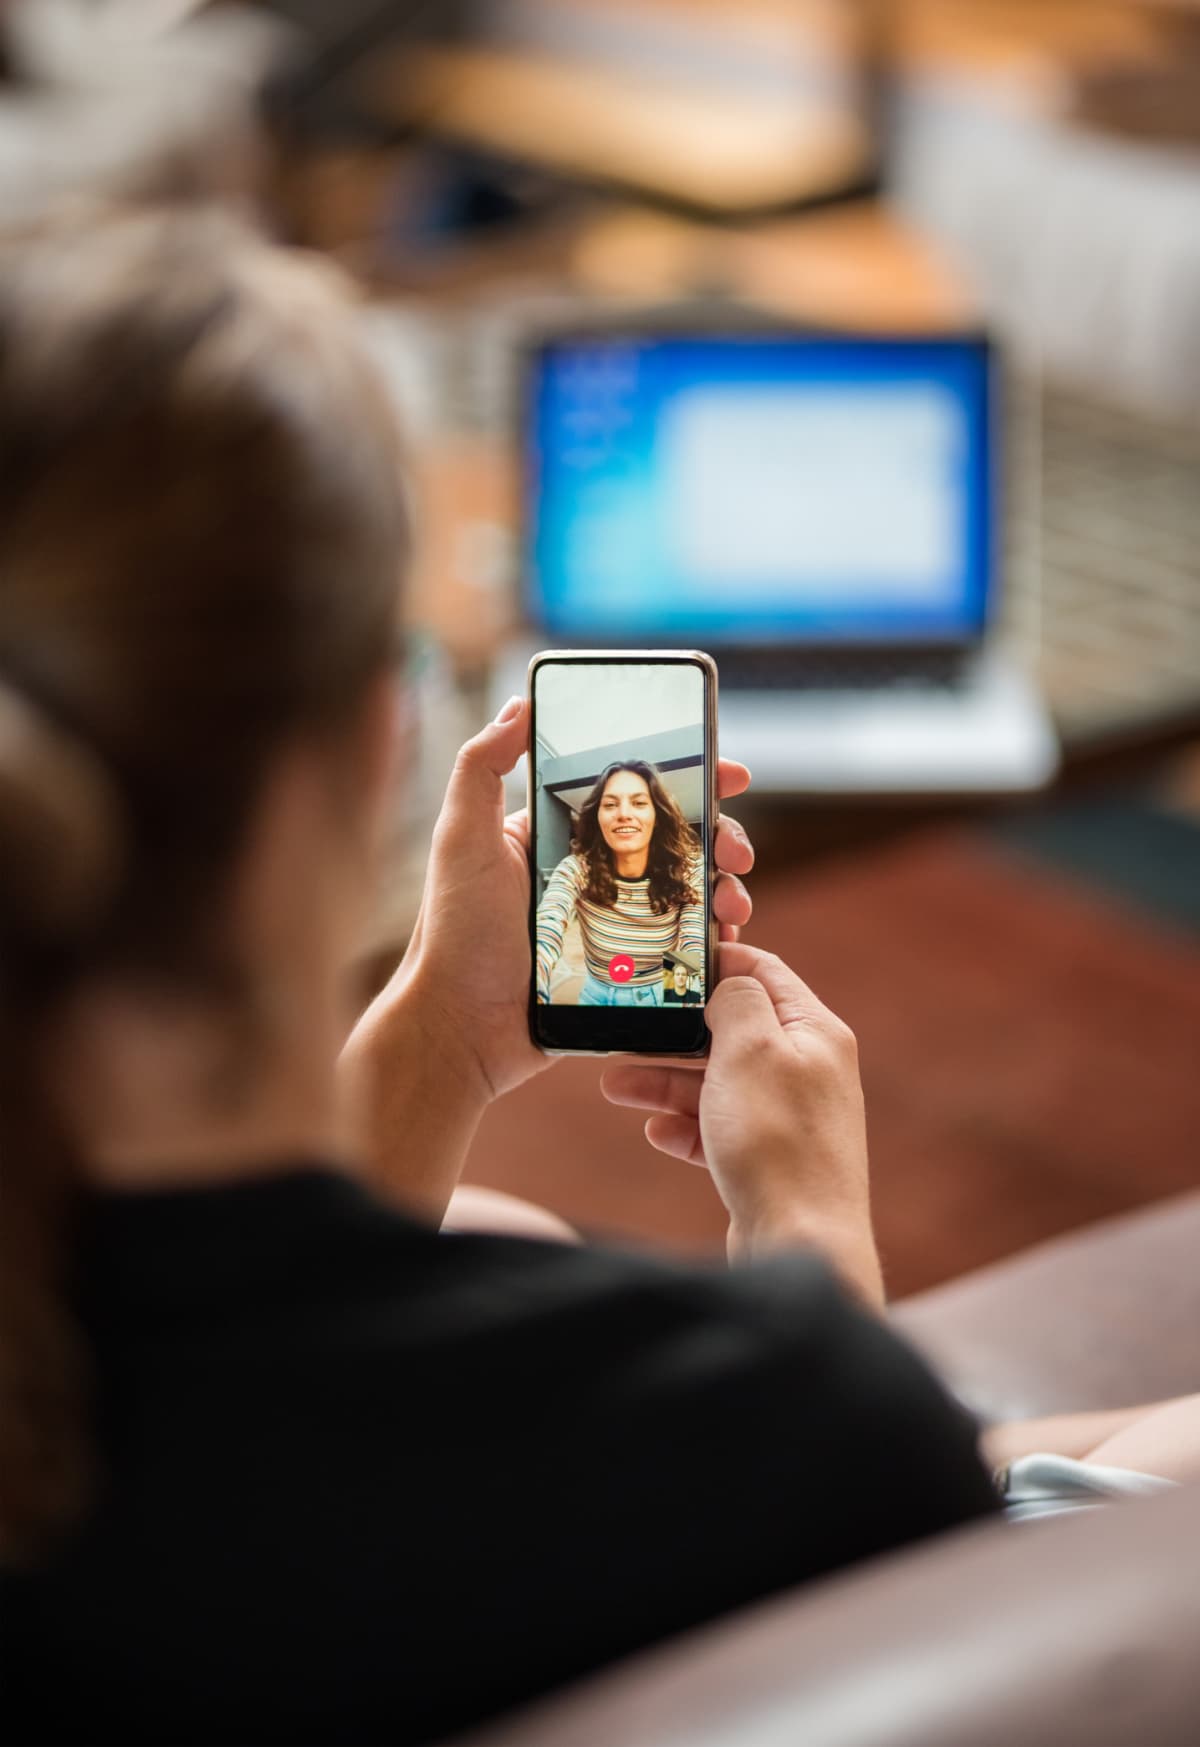 A person having a video chat with their partner.